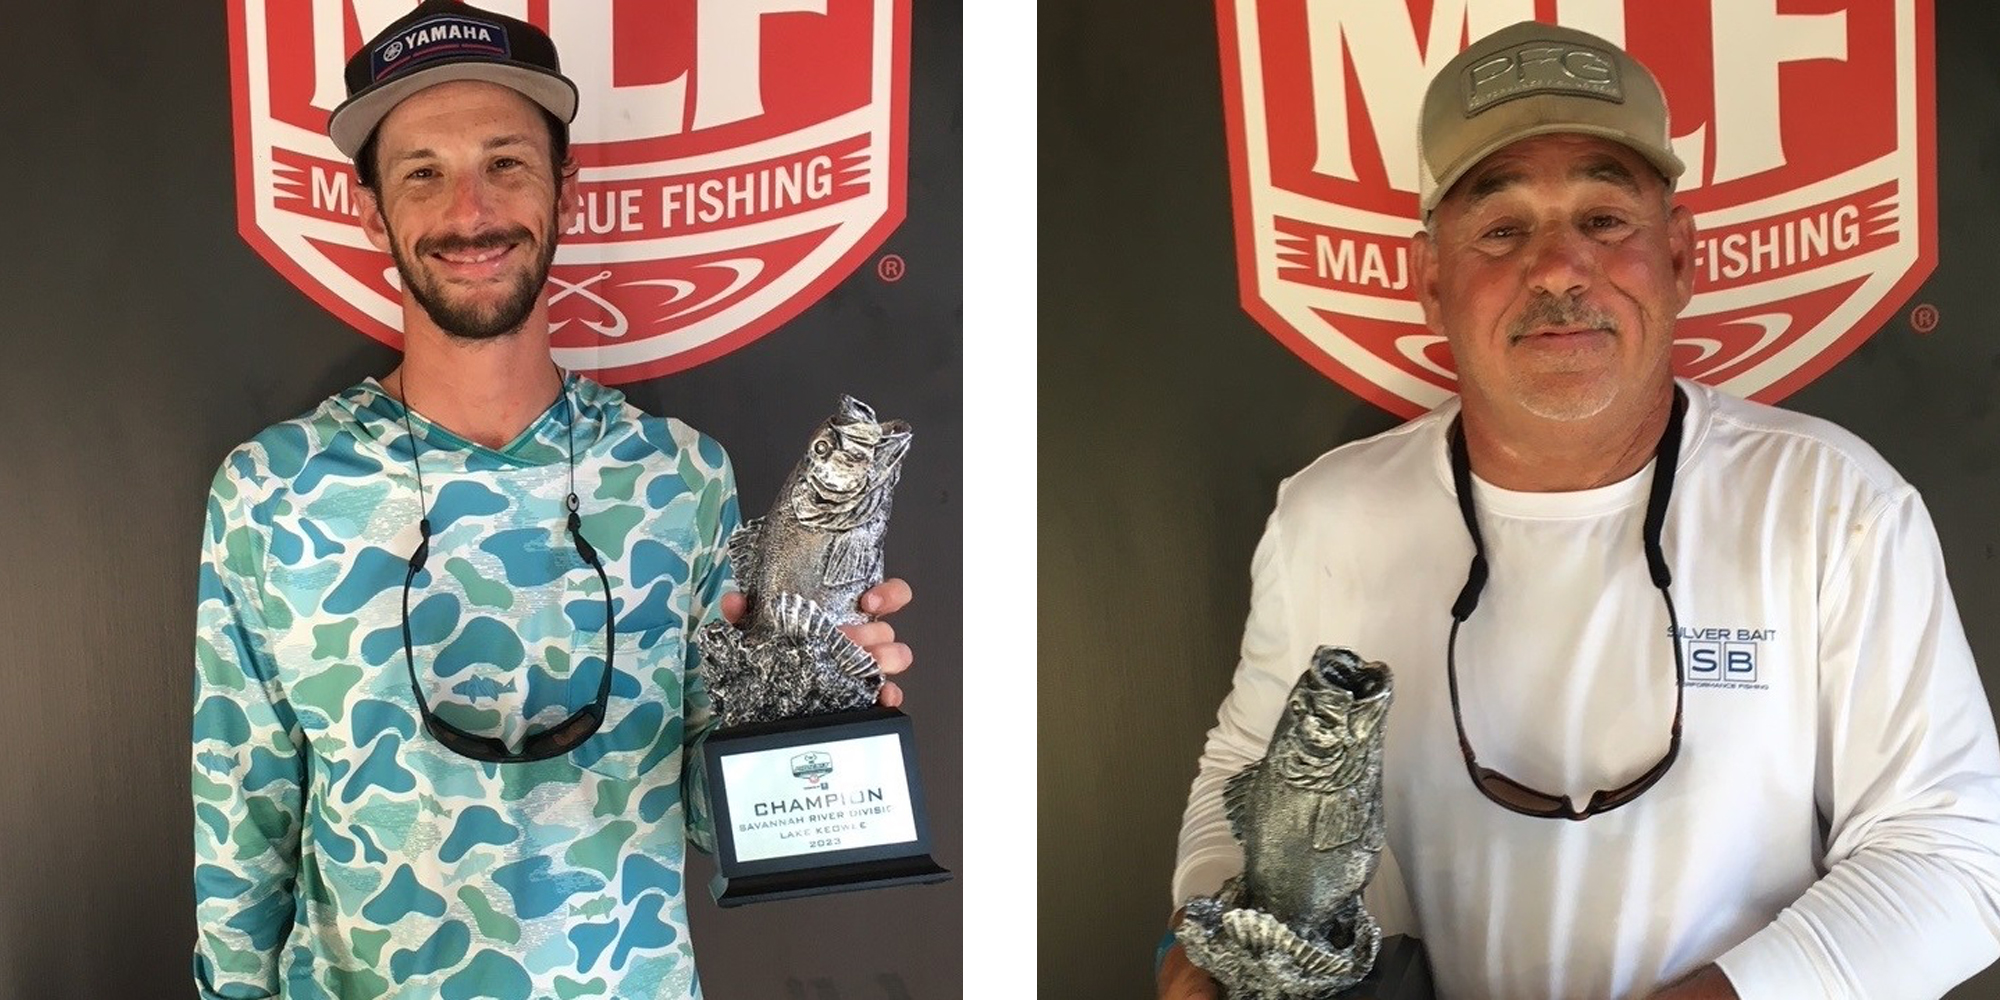 Moore's Tingen 'glides' to win at two-day Phoenix Bass Fishing